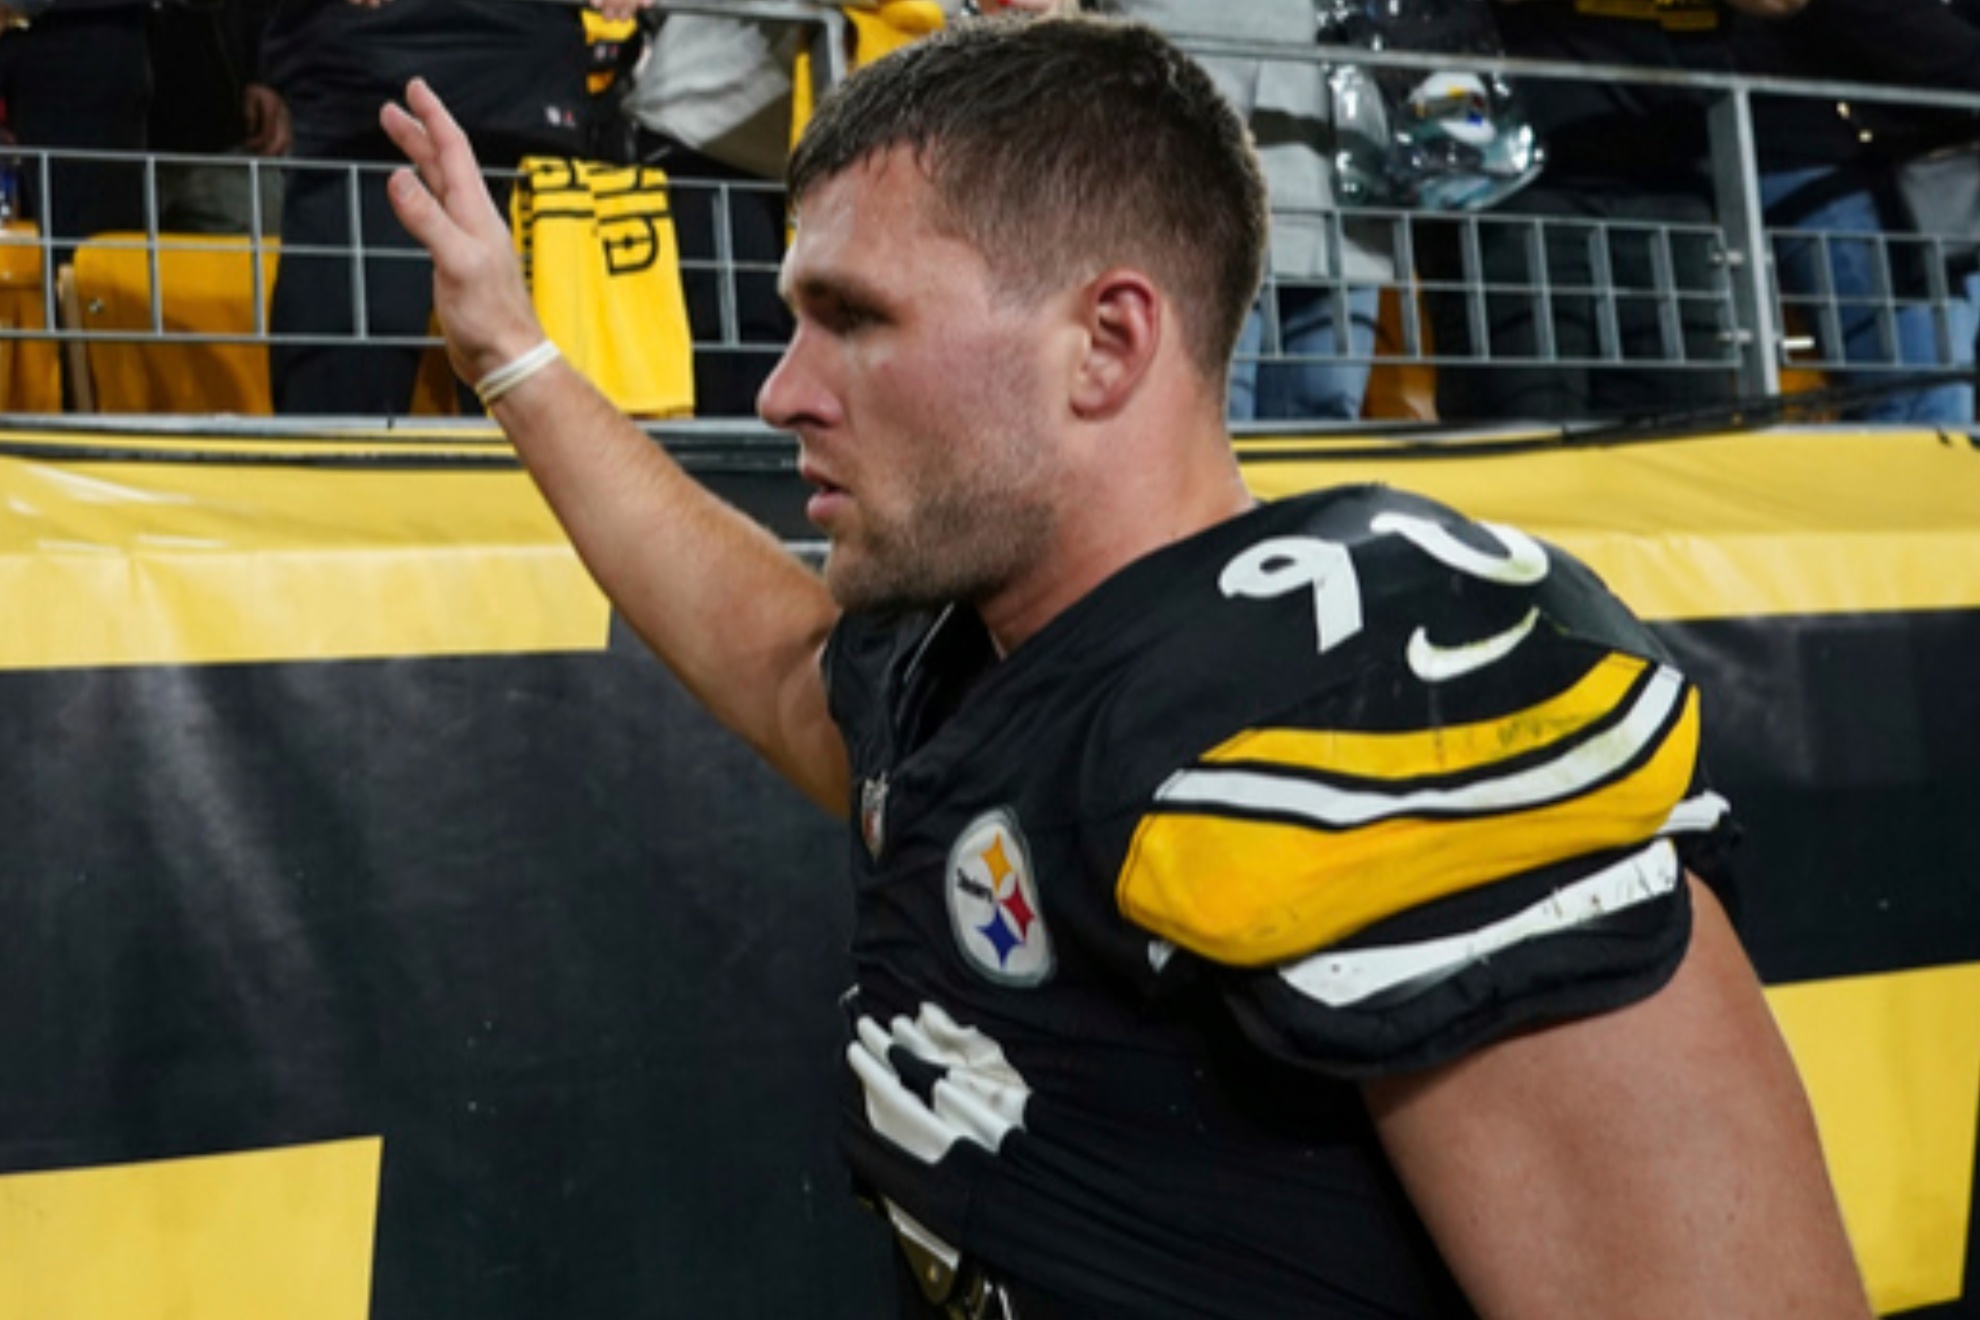 TJ Watt has recorded 88 sacks in his first 100 games in the NFL